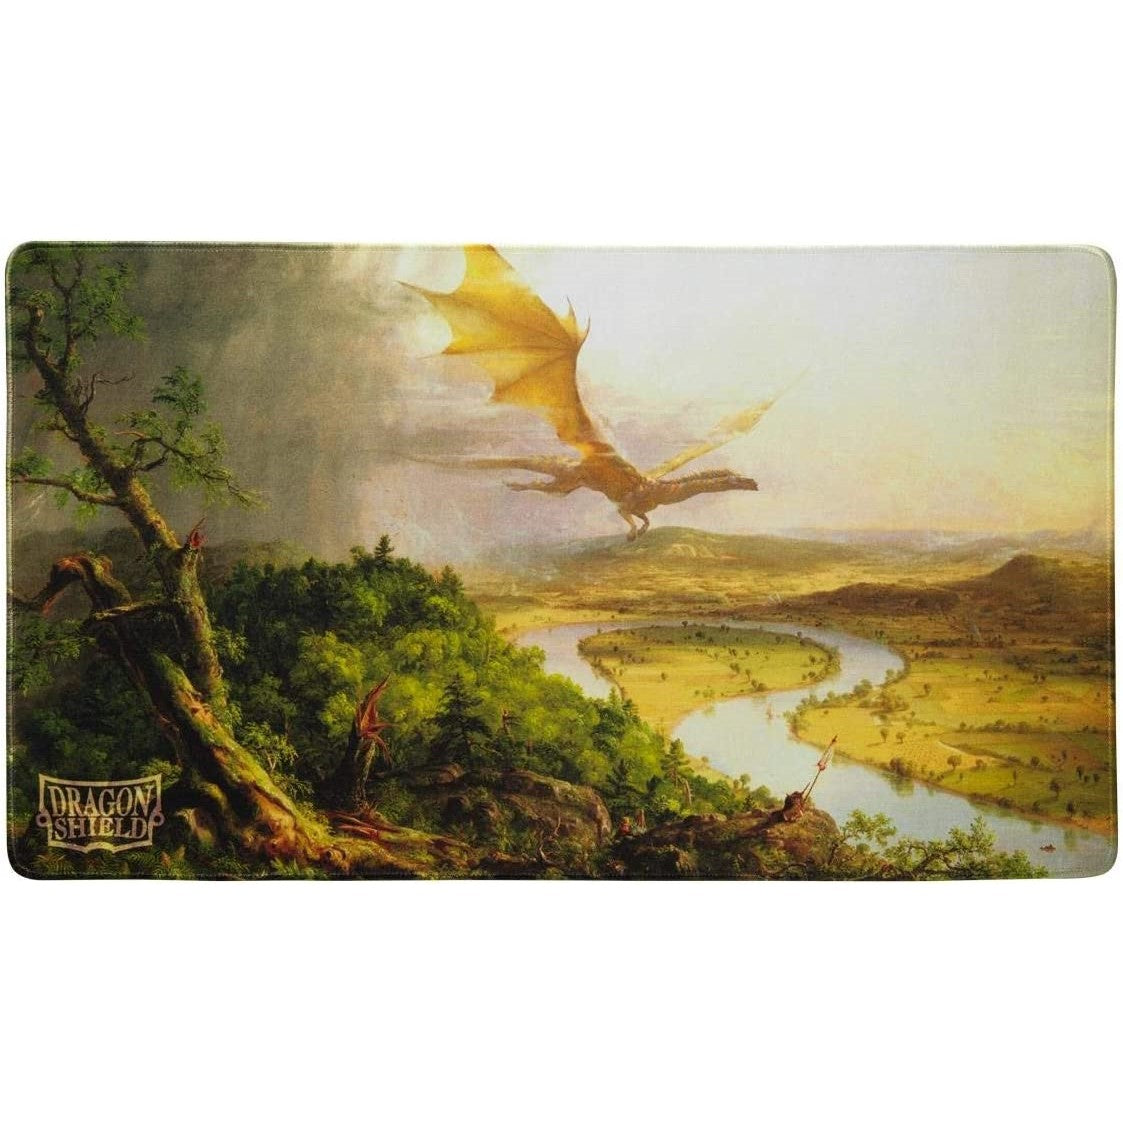 Dragon Shield Playmat: Limited Edition The Oxbow